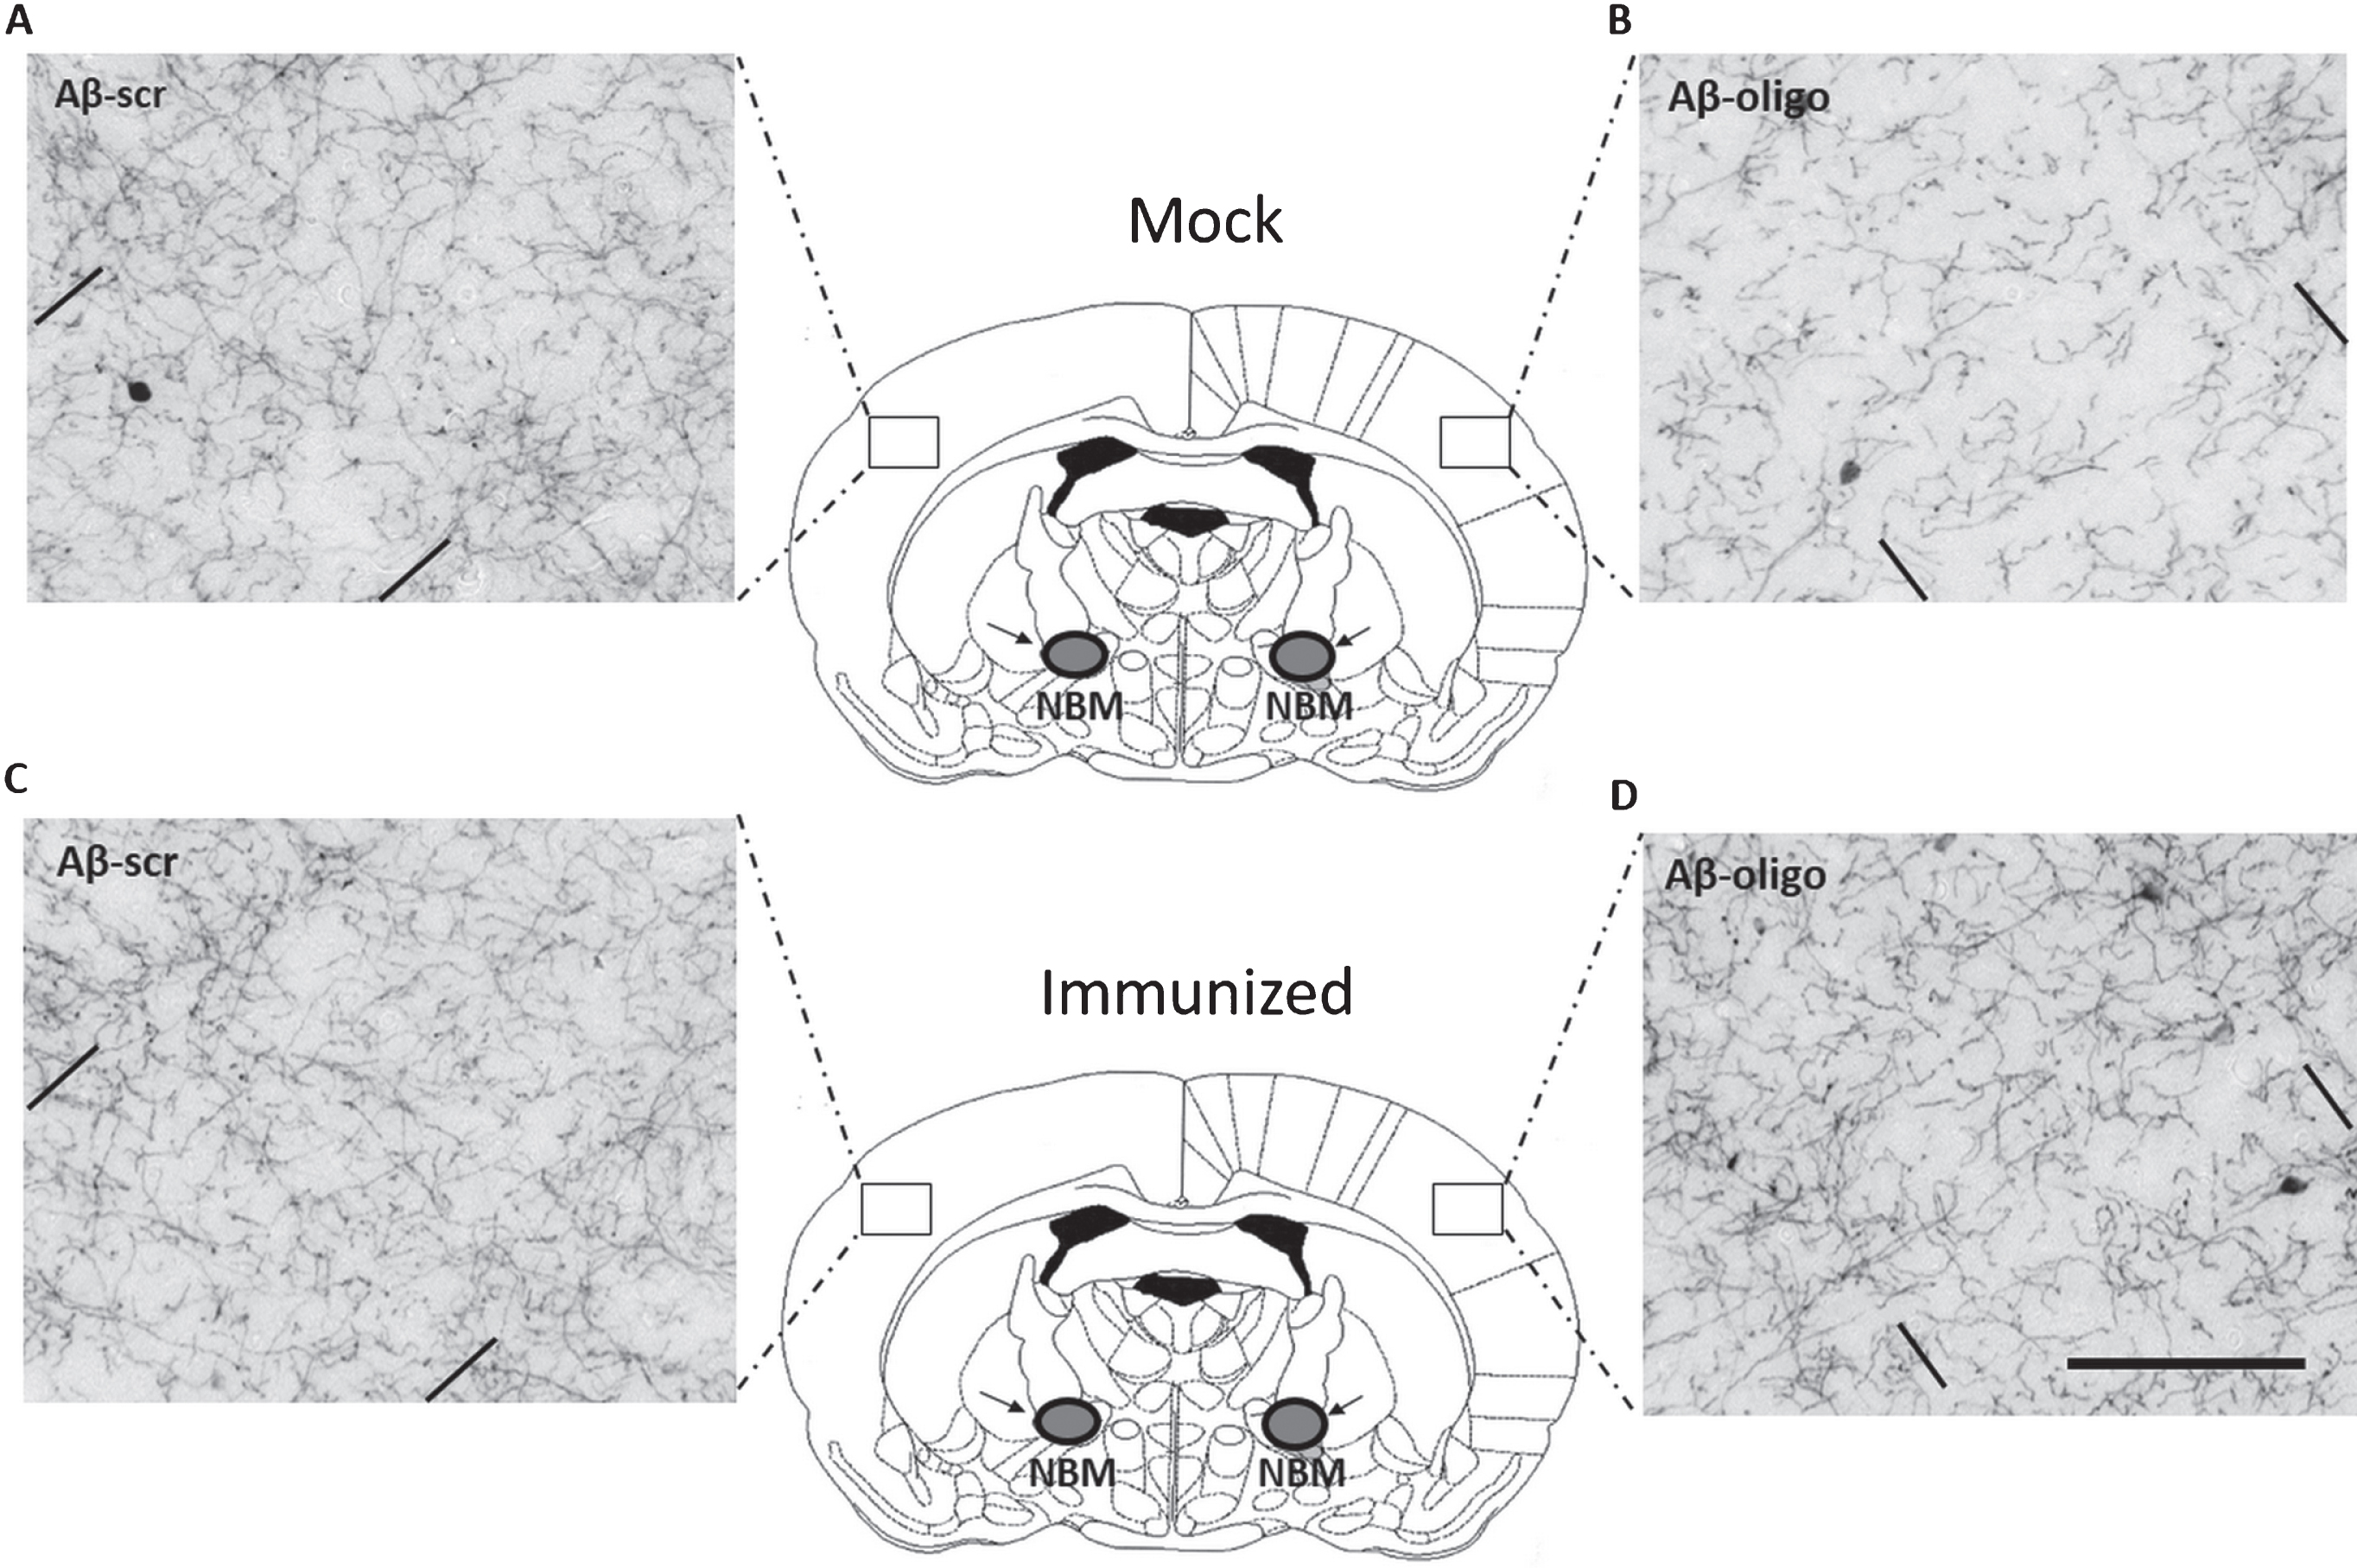 Active immunization prevents the loss of cholinergic innervations induced by oligomeric Aβ1-42 injected into the NBM. Shown are representative images of ChAT-positive fibers in the parietal neocortex of mock (A and B) and immunized mice (C and D). Images on the left (A and C) show the side of the brain injected with scrambled Aβ1-42 control peptide (Aβ-scr). Images on the right (B and D) show the contralateral lesion-sides of the brain injected with oligomeric Aβ1-42 (Aβ-oligo). Note that in practice the compounds were randomly injected in the left- or right side of the brain. Comparing control and lesion sides of the brain, immunized mice show reduced fiber loss compared to mock mice. In each image the area between the parallel bars indicate the quantified area (layer V of the somatosensory cortex). The horizontal scale bar shown in (D) applies to all images and represents 100 μm.